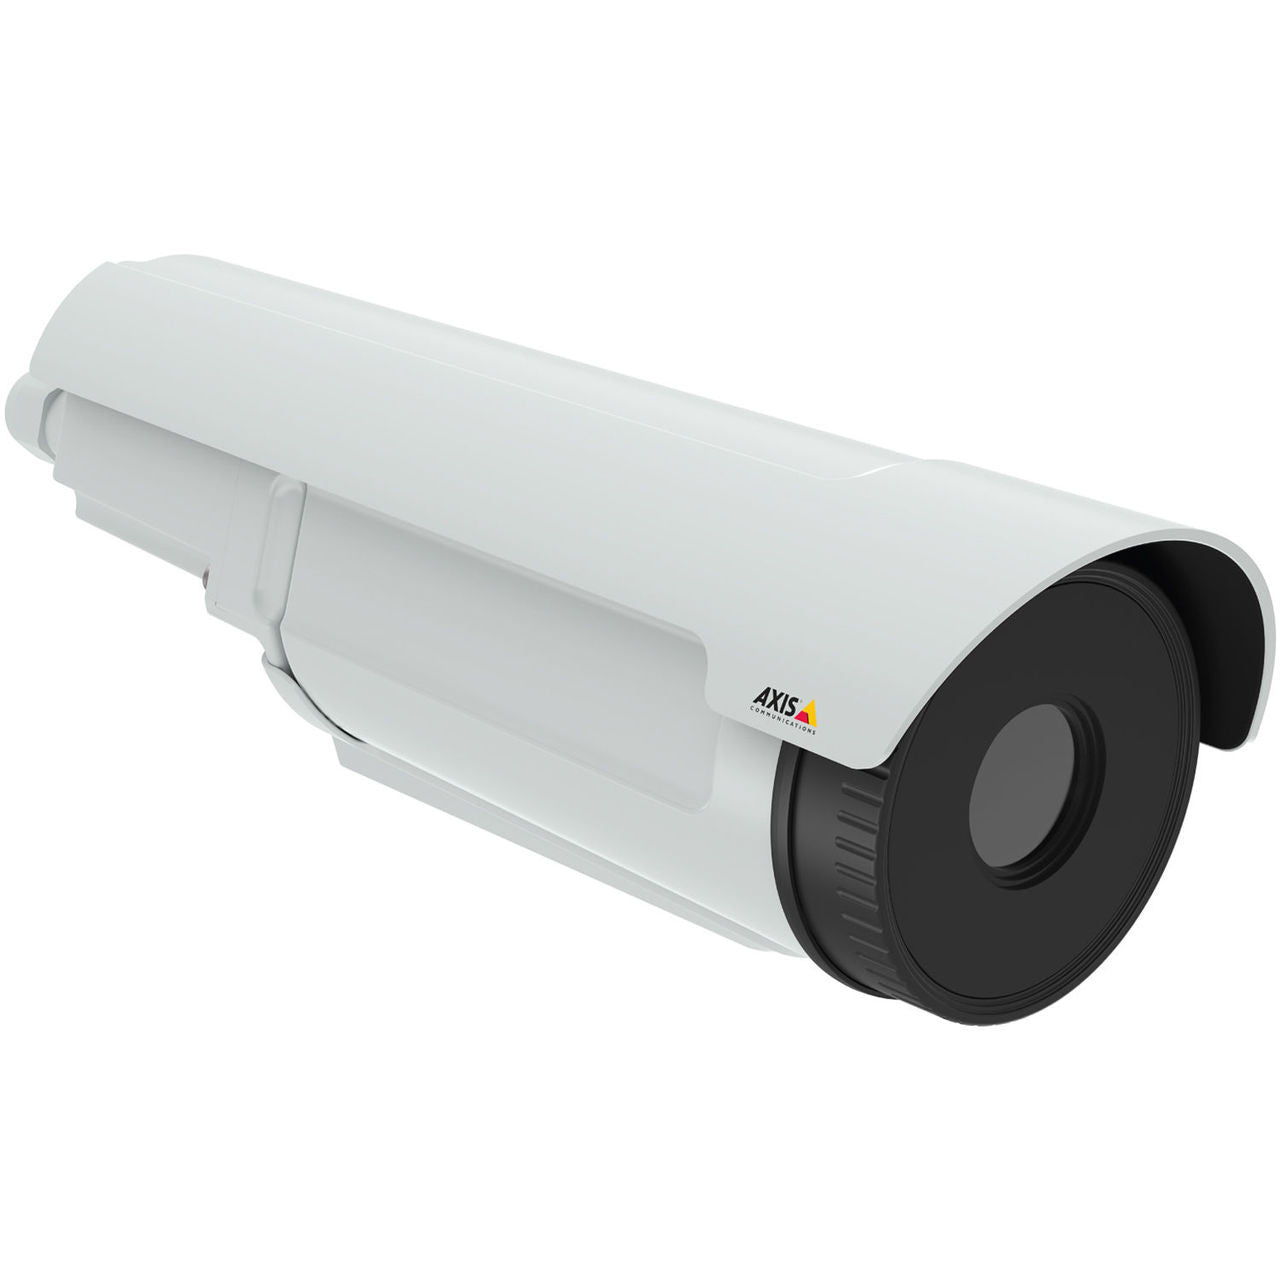 AXIS Q1942-E PT Mount (0984-001) 35mm 8.3fps Thermal Network Camera